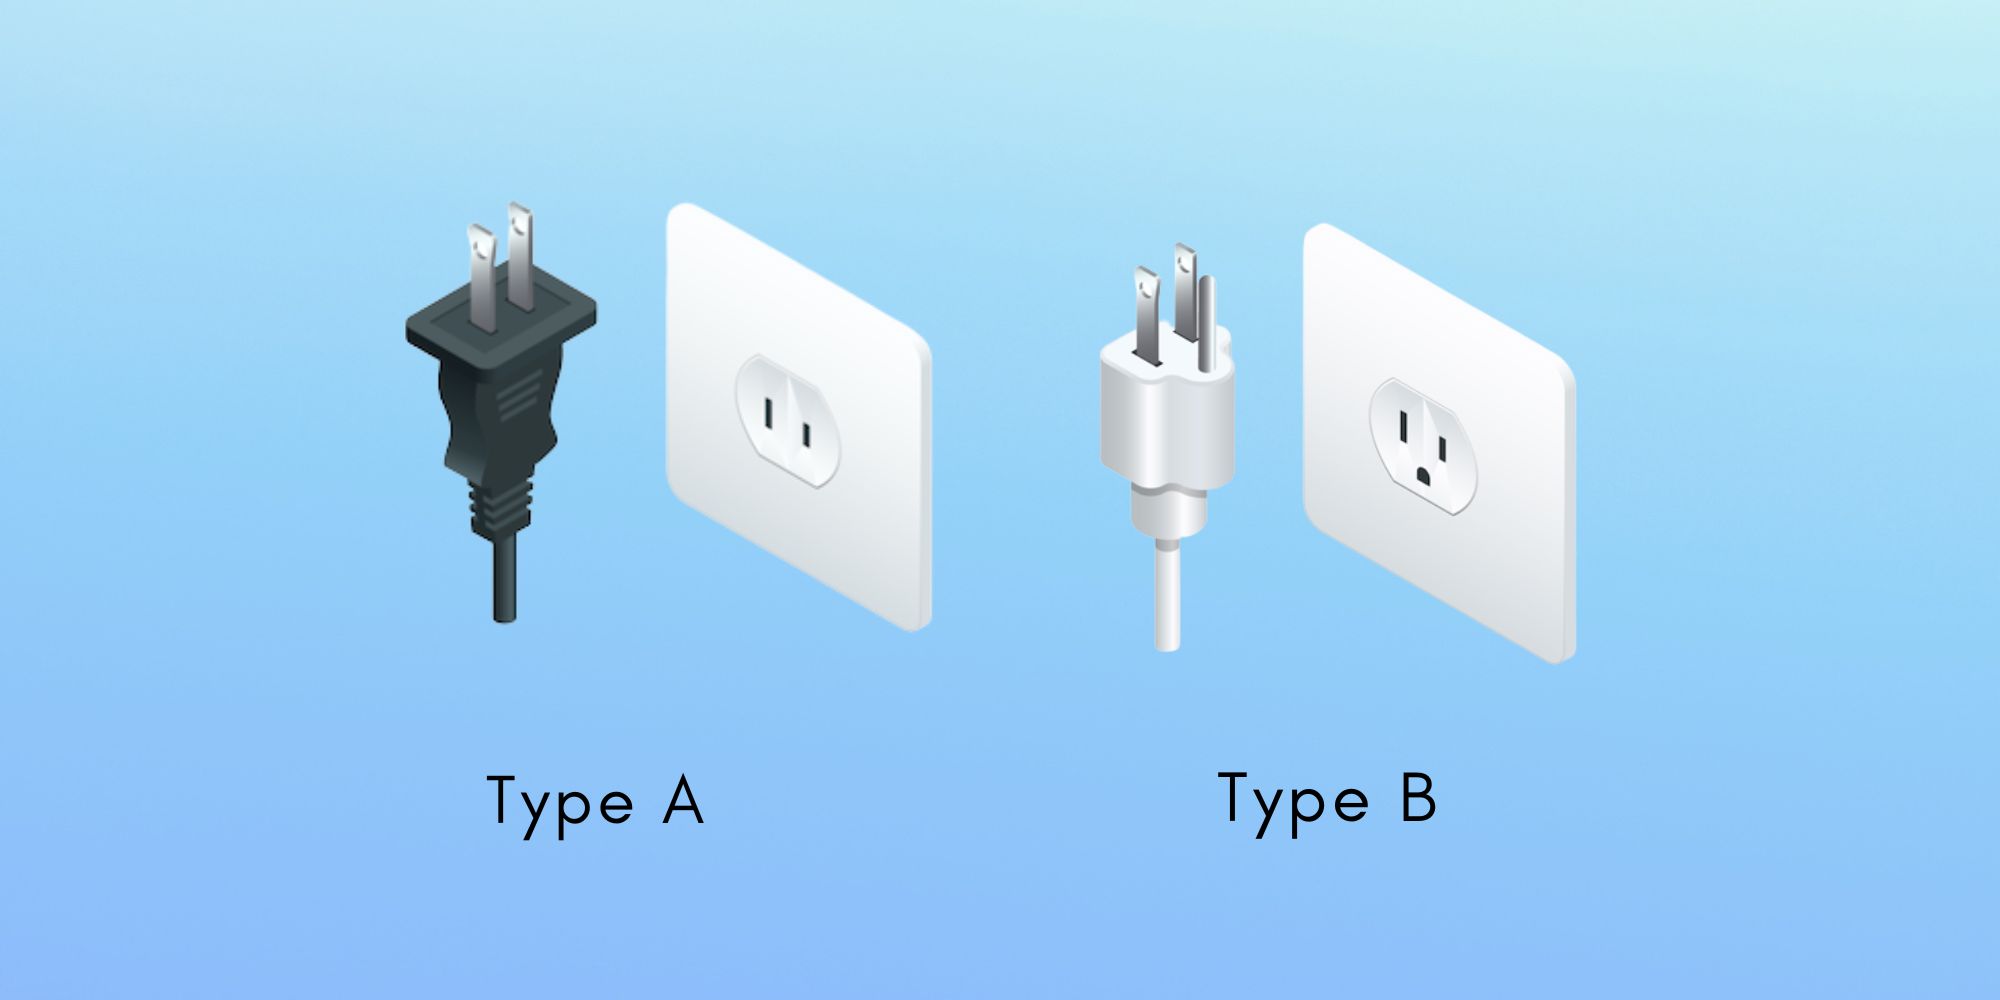 Venezuela Power Plugs and Sockets: Type A and Type B
